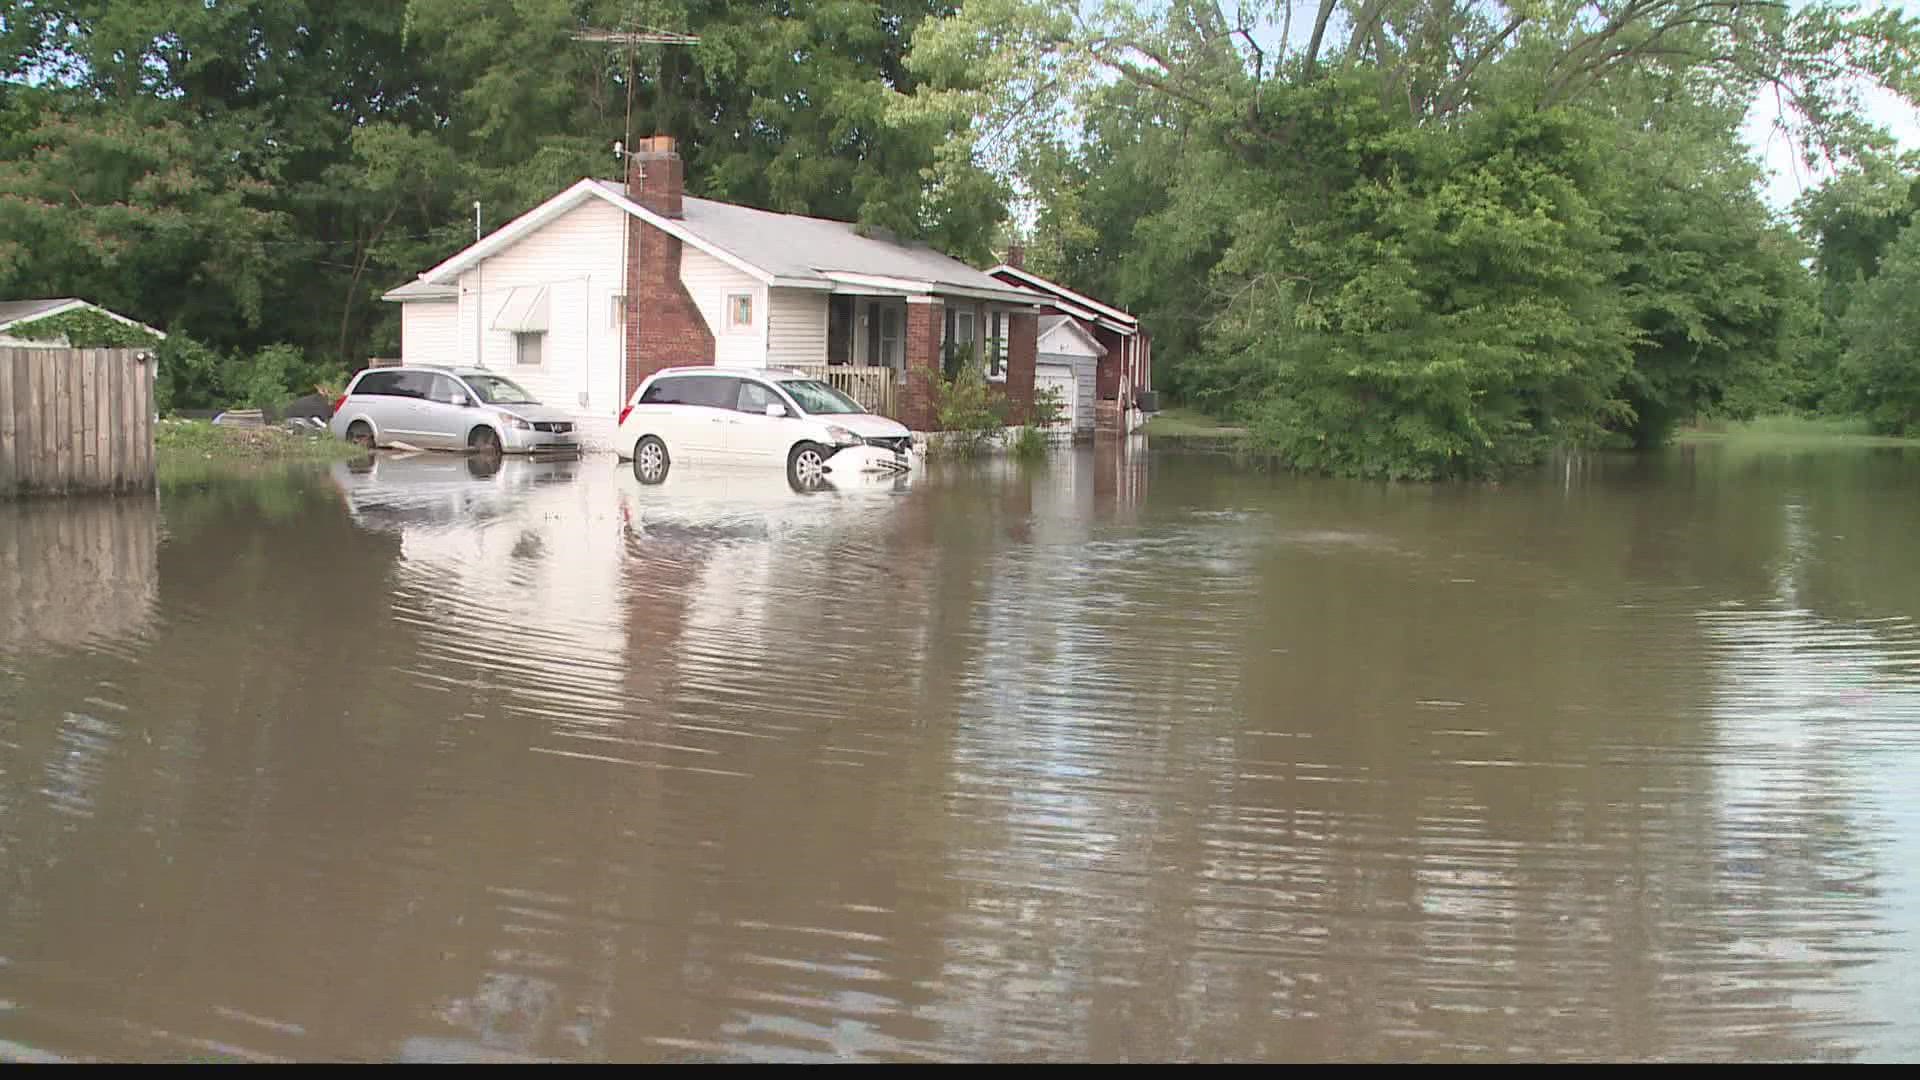 "It's just so frustrating to see your yard and street flooded. It's as if nobody cares," said Terry Barnes.